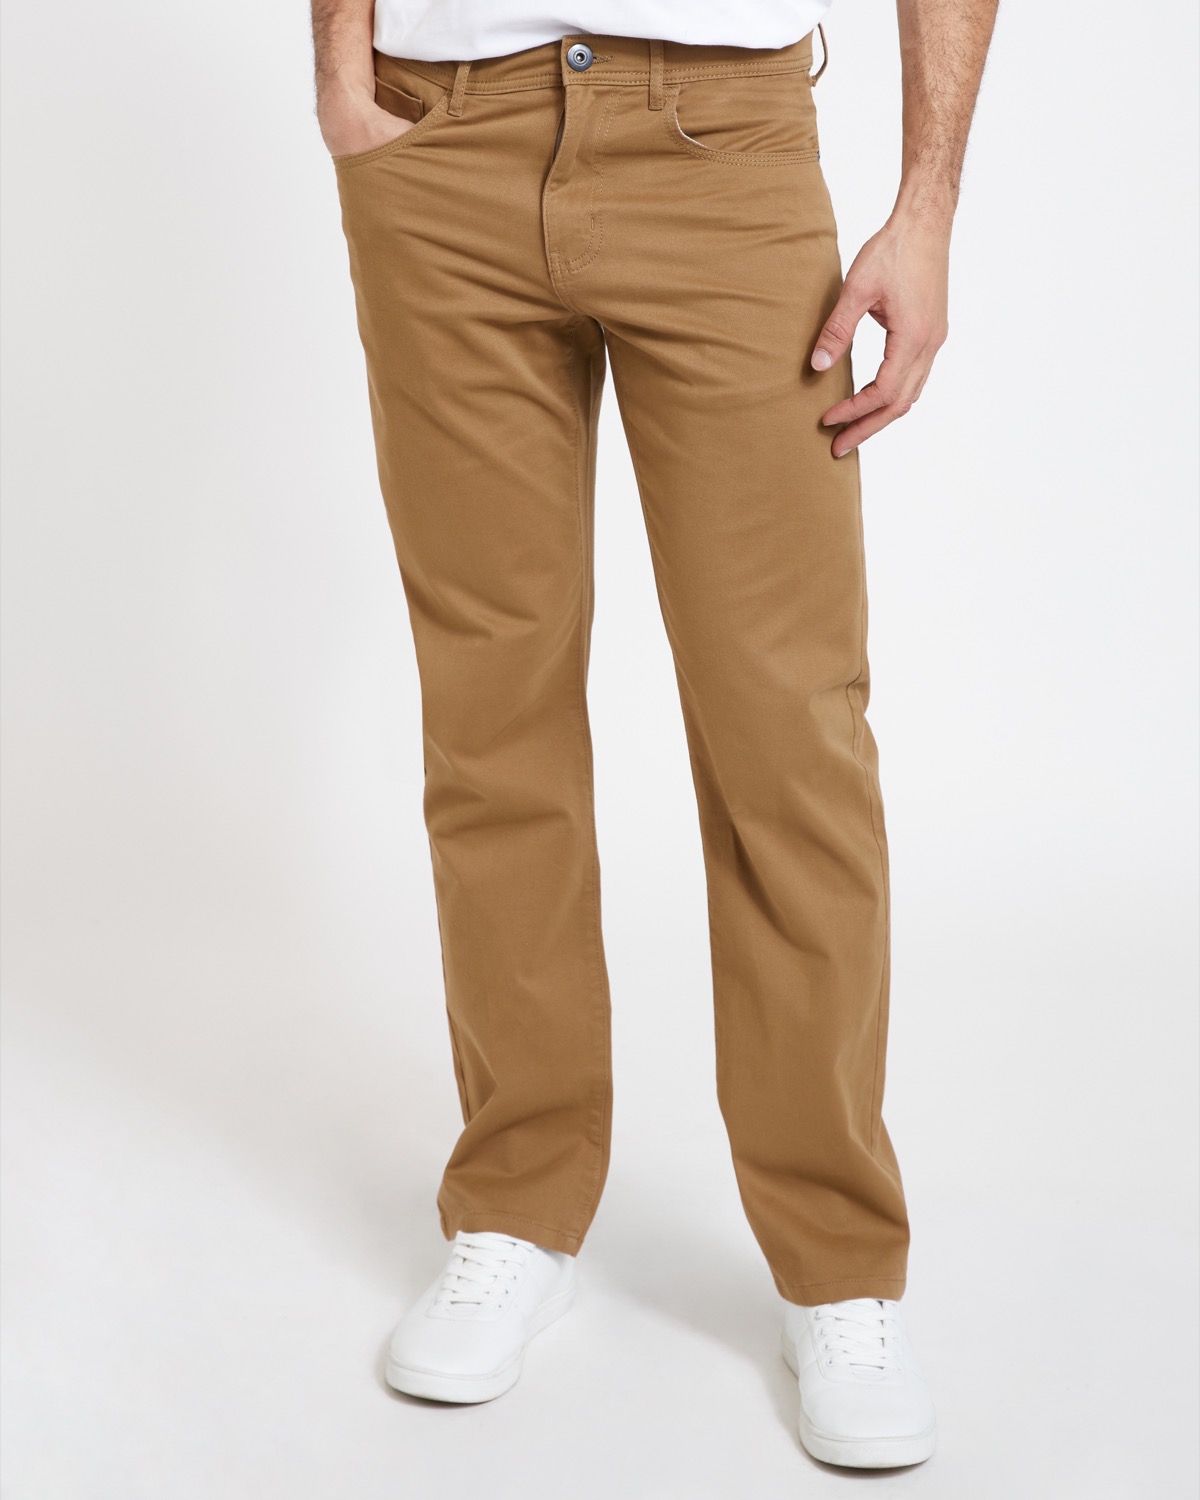 Eight Bells Men's 5 Pocket Twill Pants | Casual & Dress Pants | Apparel -  Shop Your Navy Exchange - Official Site